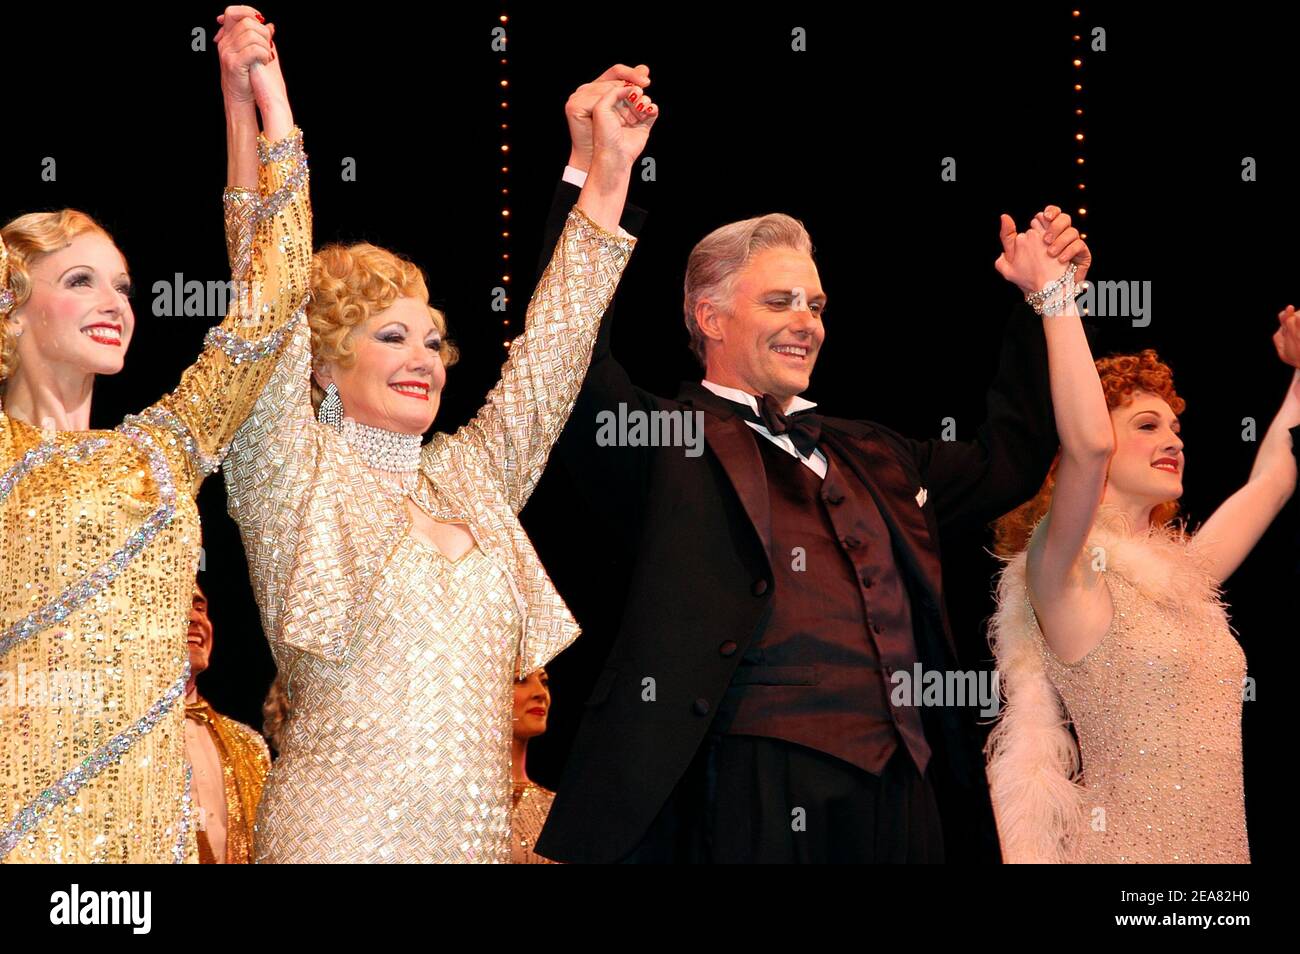 Nadine Isenegger, Shirley Jones and son Patrick Cassidy during the curtain call of the new Broadway production 42nd street, at Ford Center, in New York, NY, USA - May 7, 2004. (pictured: Nadine Isenegger, Shirley Jones, Patrick Cassidy) Photo by Antoine Cau/Abaca Stock Photo